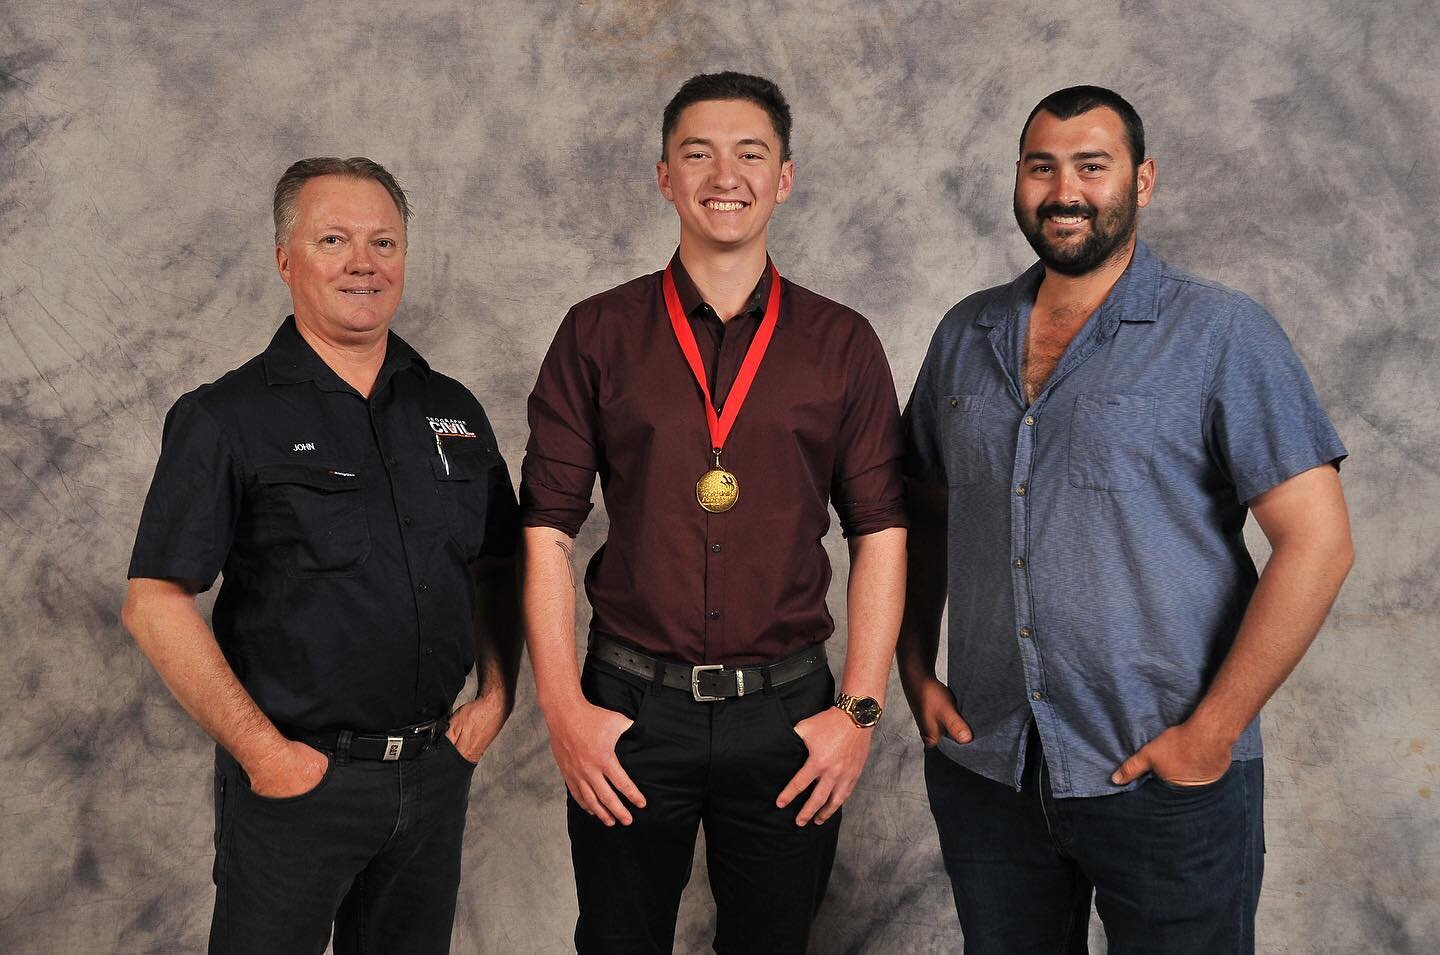 John, Taj and Brandon attended the worldskills breakfast at the crown last week. 

Taj was awarded his gold medal and will be heading to Melbourne in 2023 to compete in the WorldSkills National Championships.

Congratulations to Taj from everyone at 